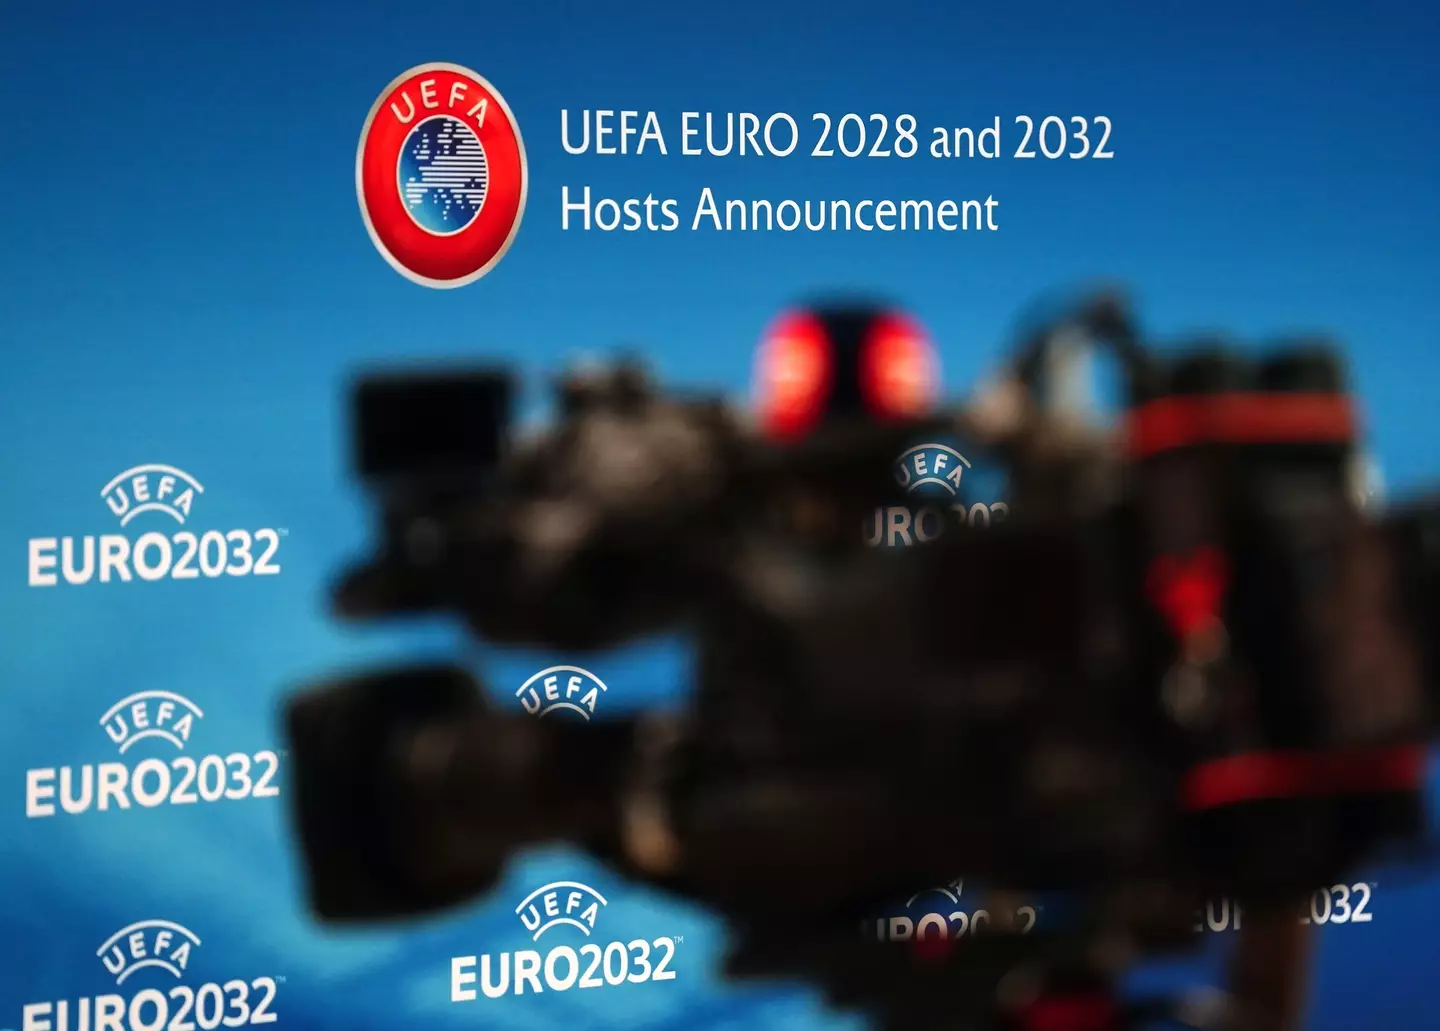 The UK and Ireland will host Euro 2028 after Turkey dropped out of the running.